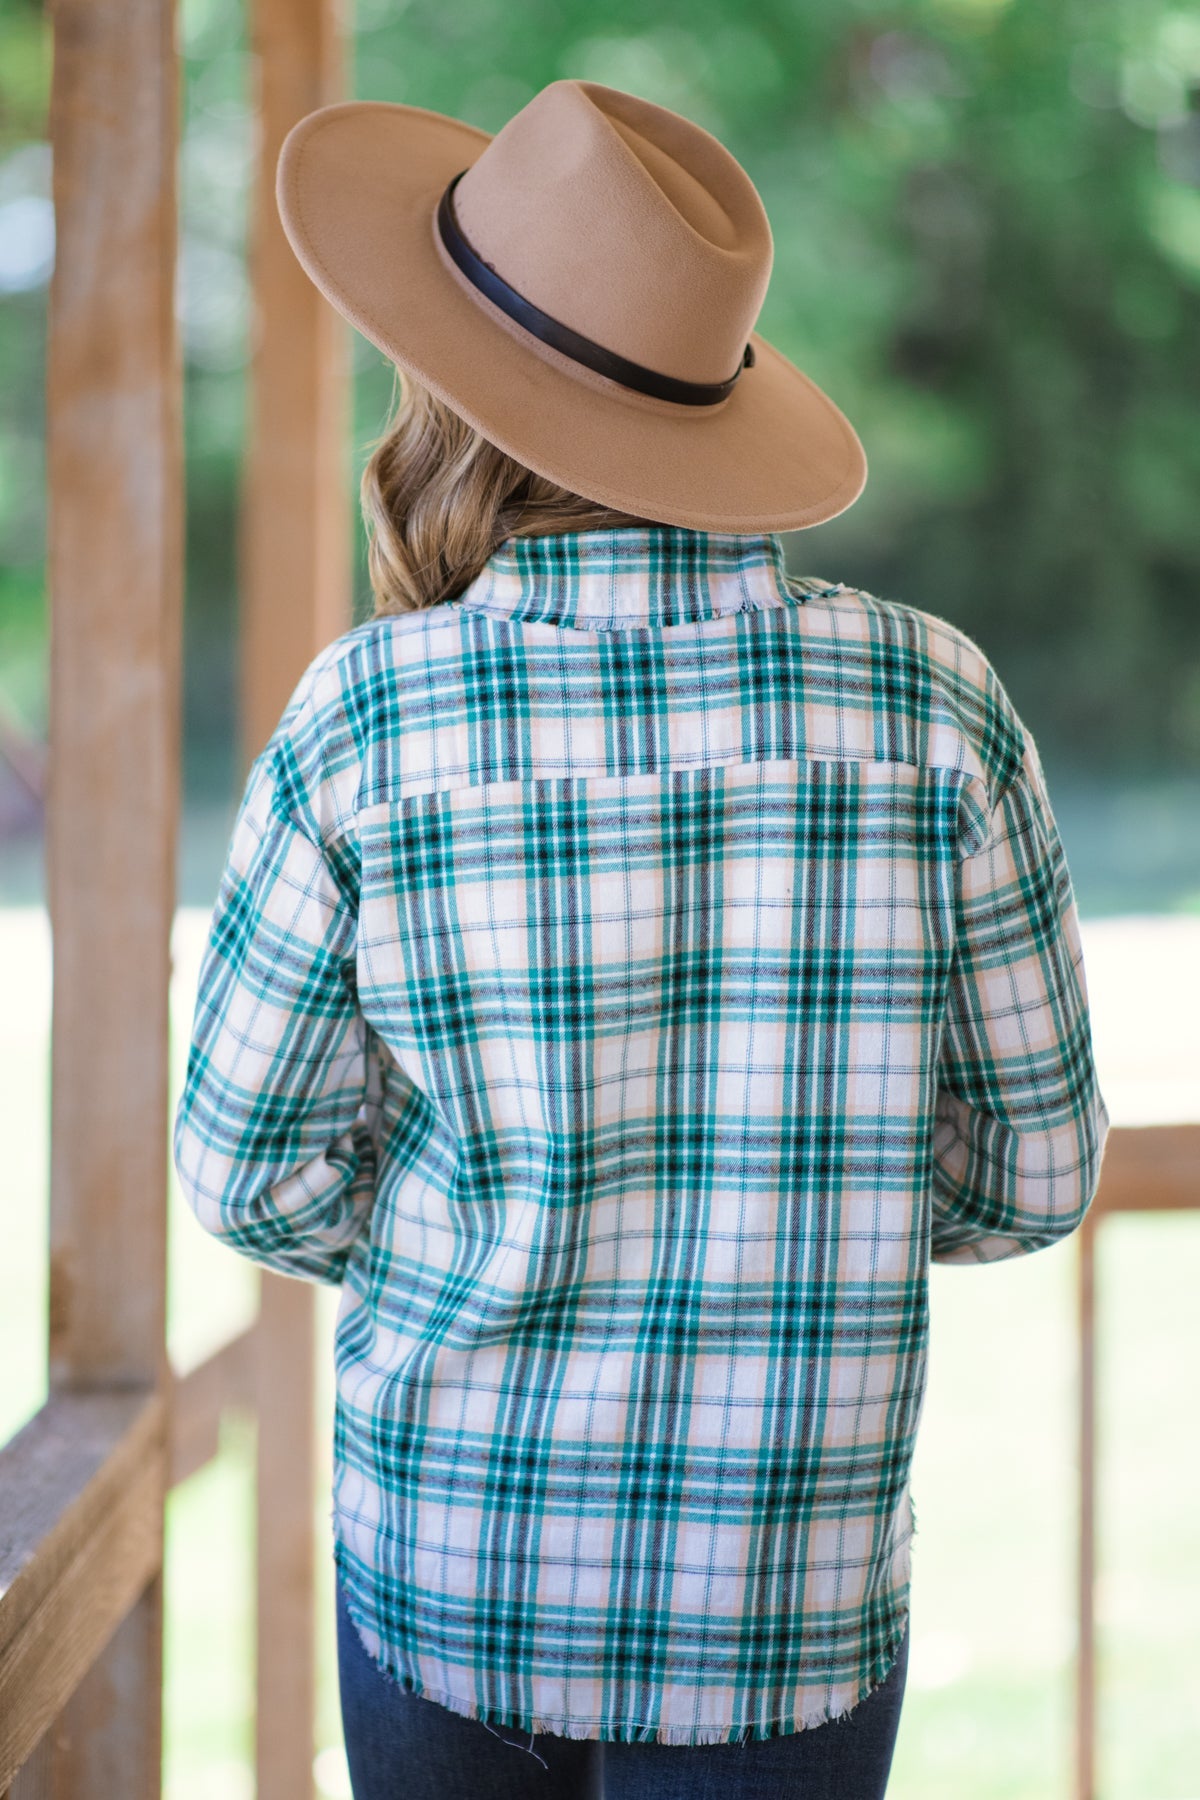 Jade and Beige Plaid Button Up Top - Filly Flair